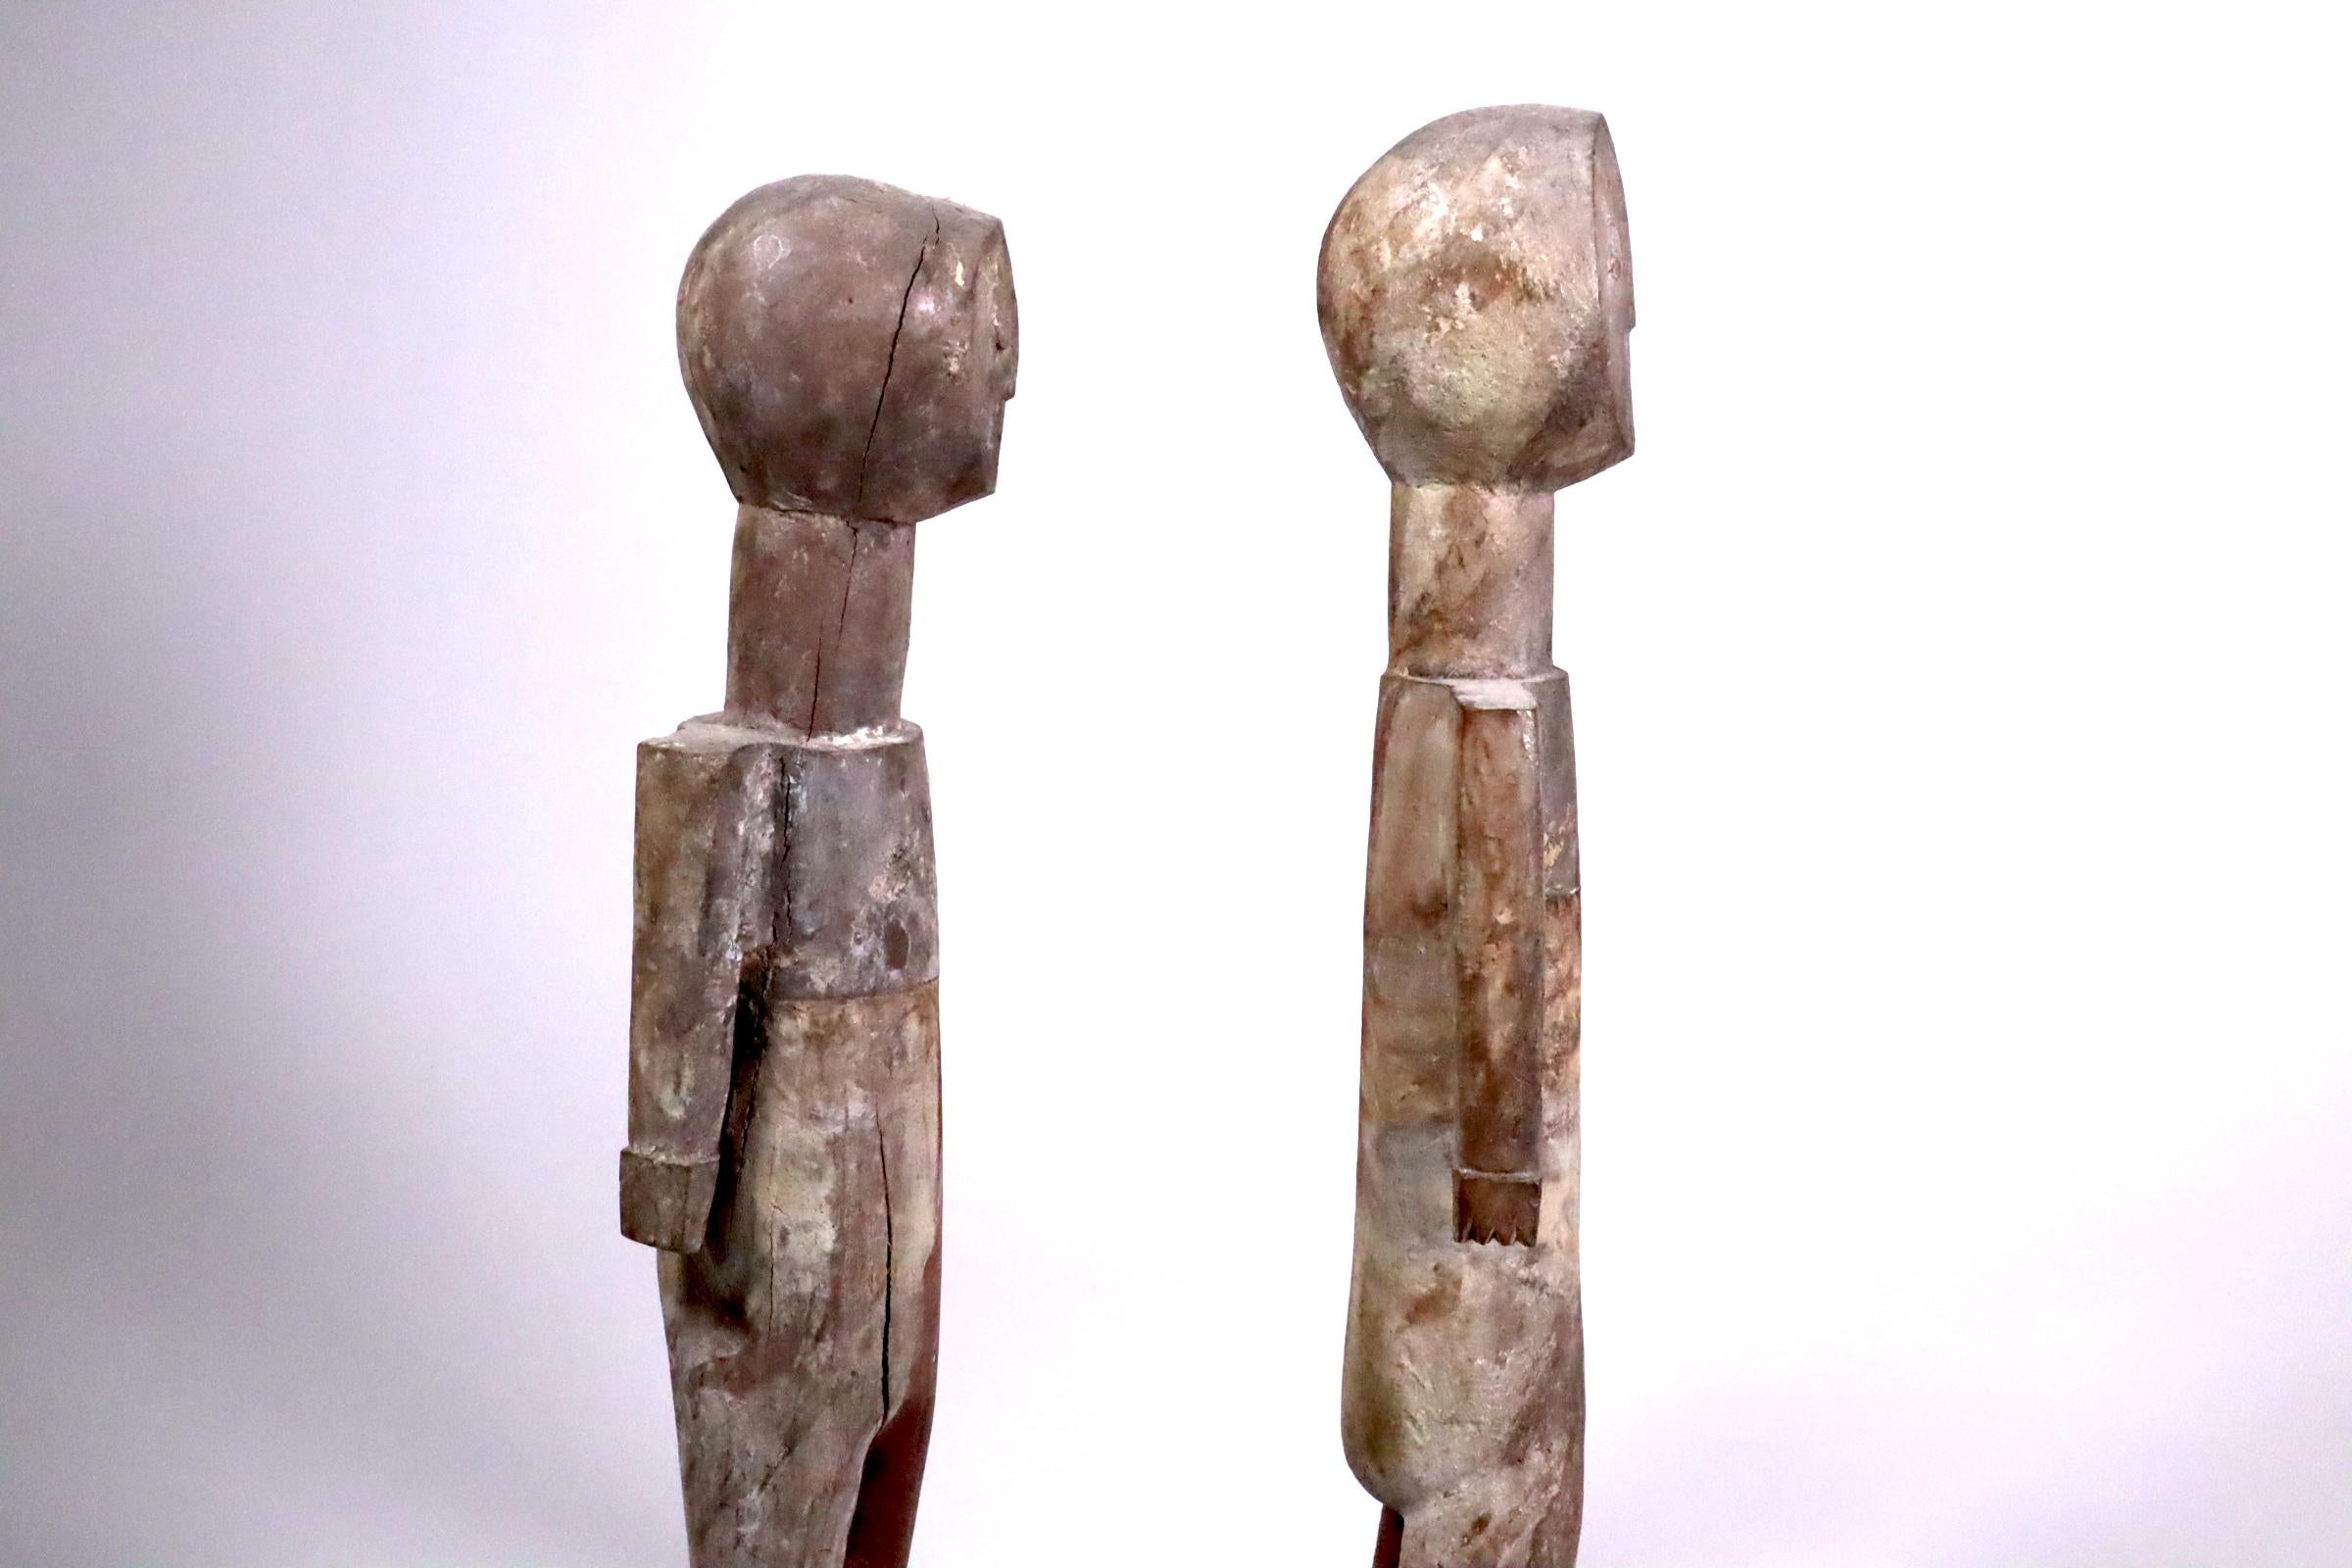 Hand-Carved Pair of Adan Figures Togo Ghana Minimal Cubist Expressionist African Tribal Art